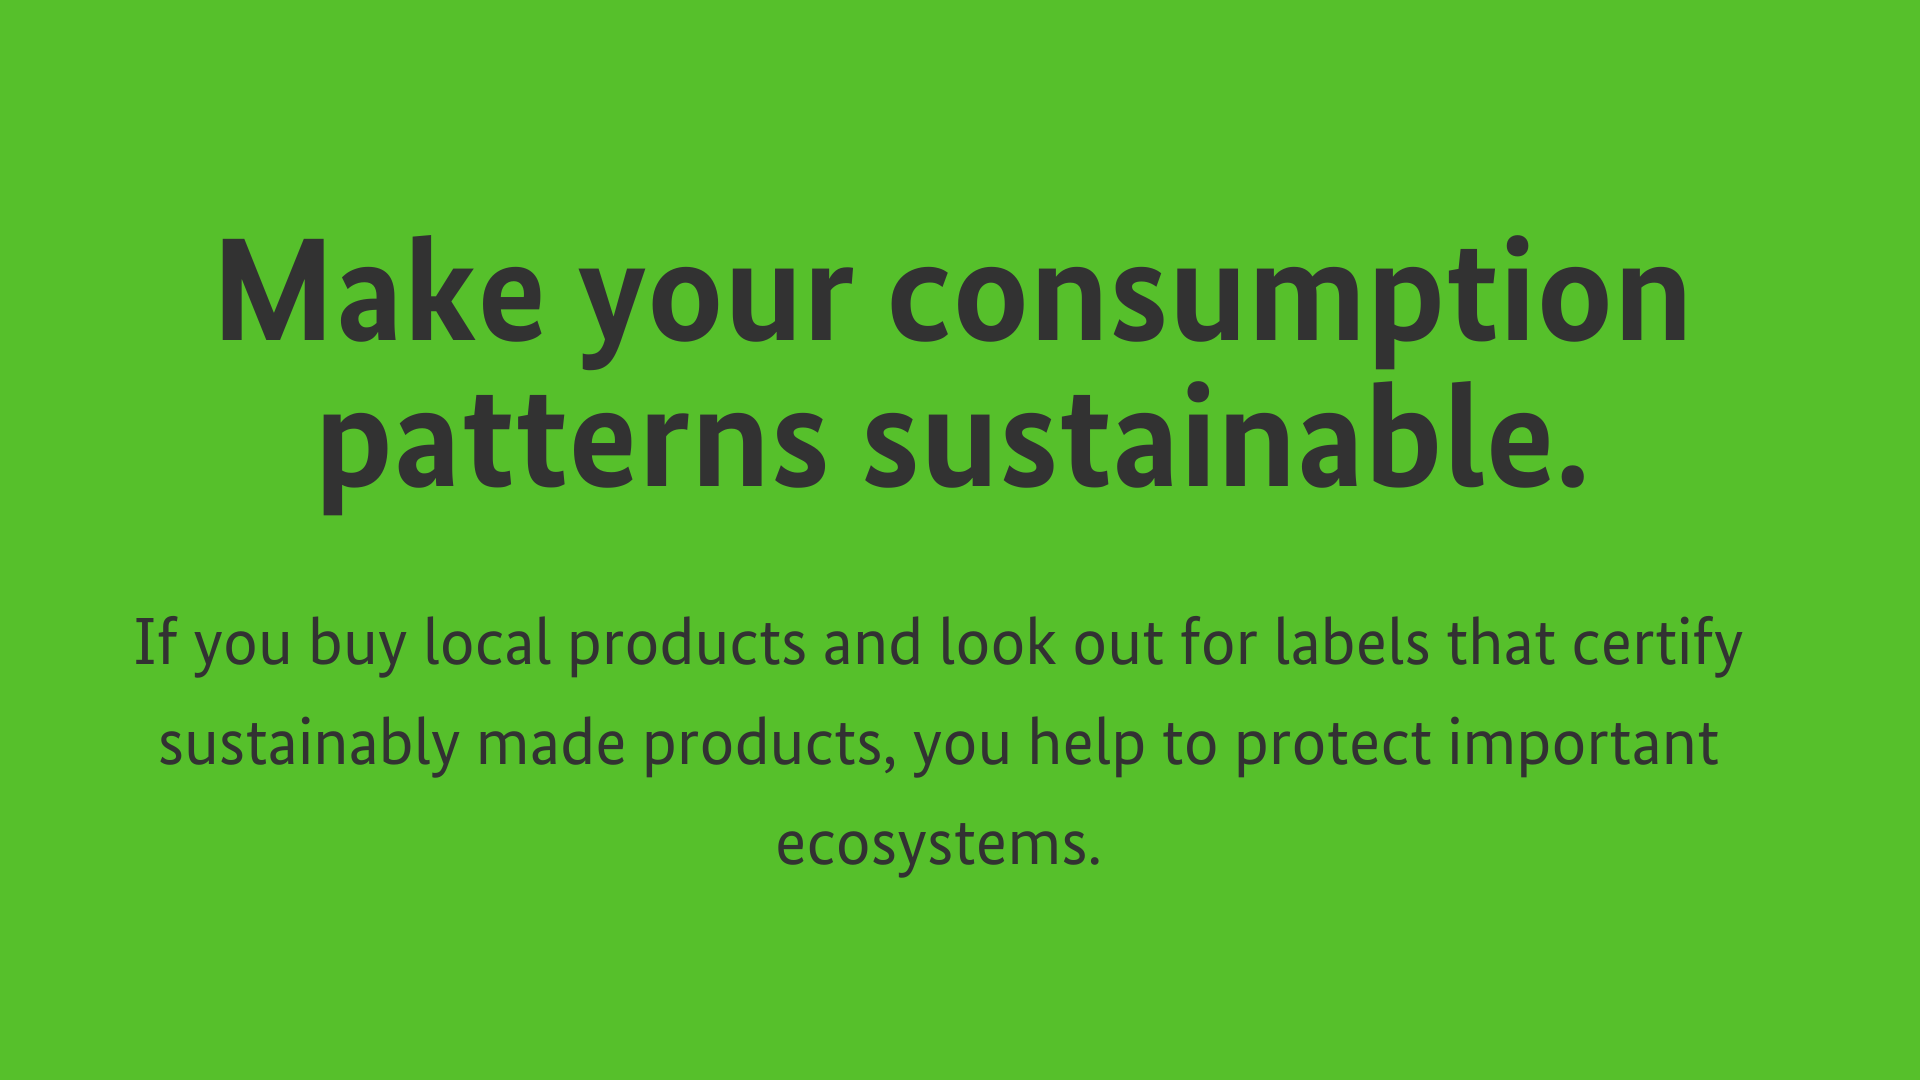 Make your consumption patterns sustainable. If you buy local products and look out for labels that certify sustainably made products, you help to protect important ecosystems.